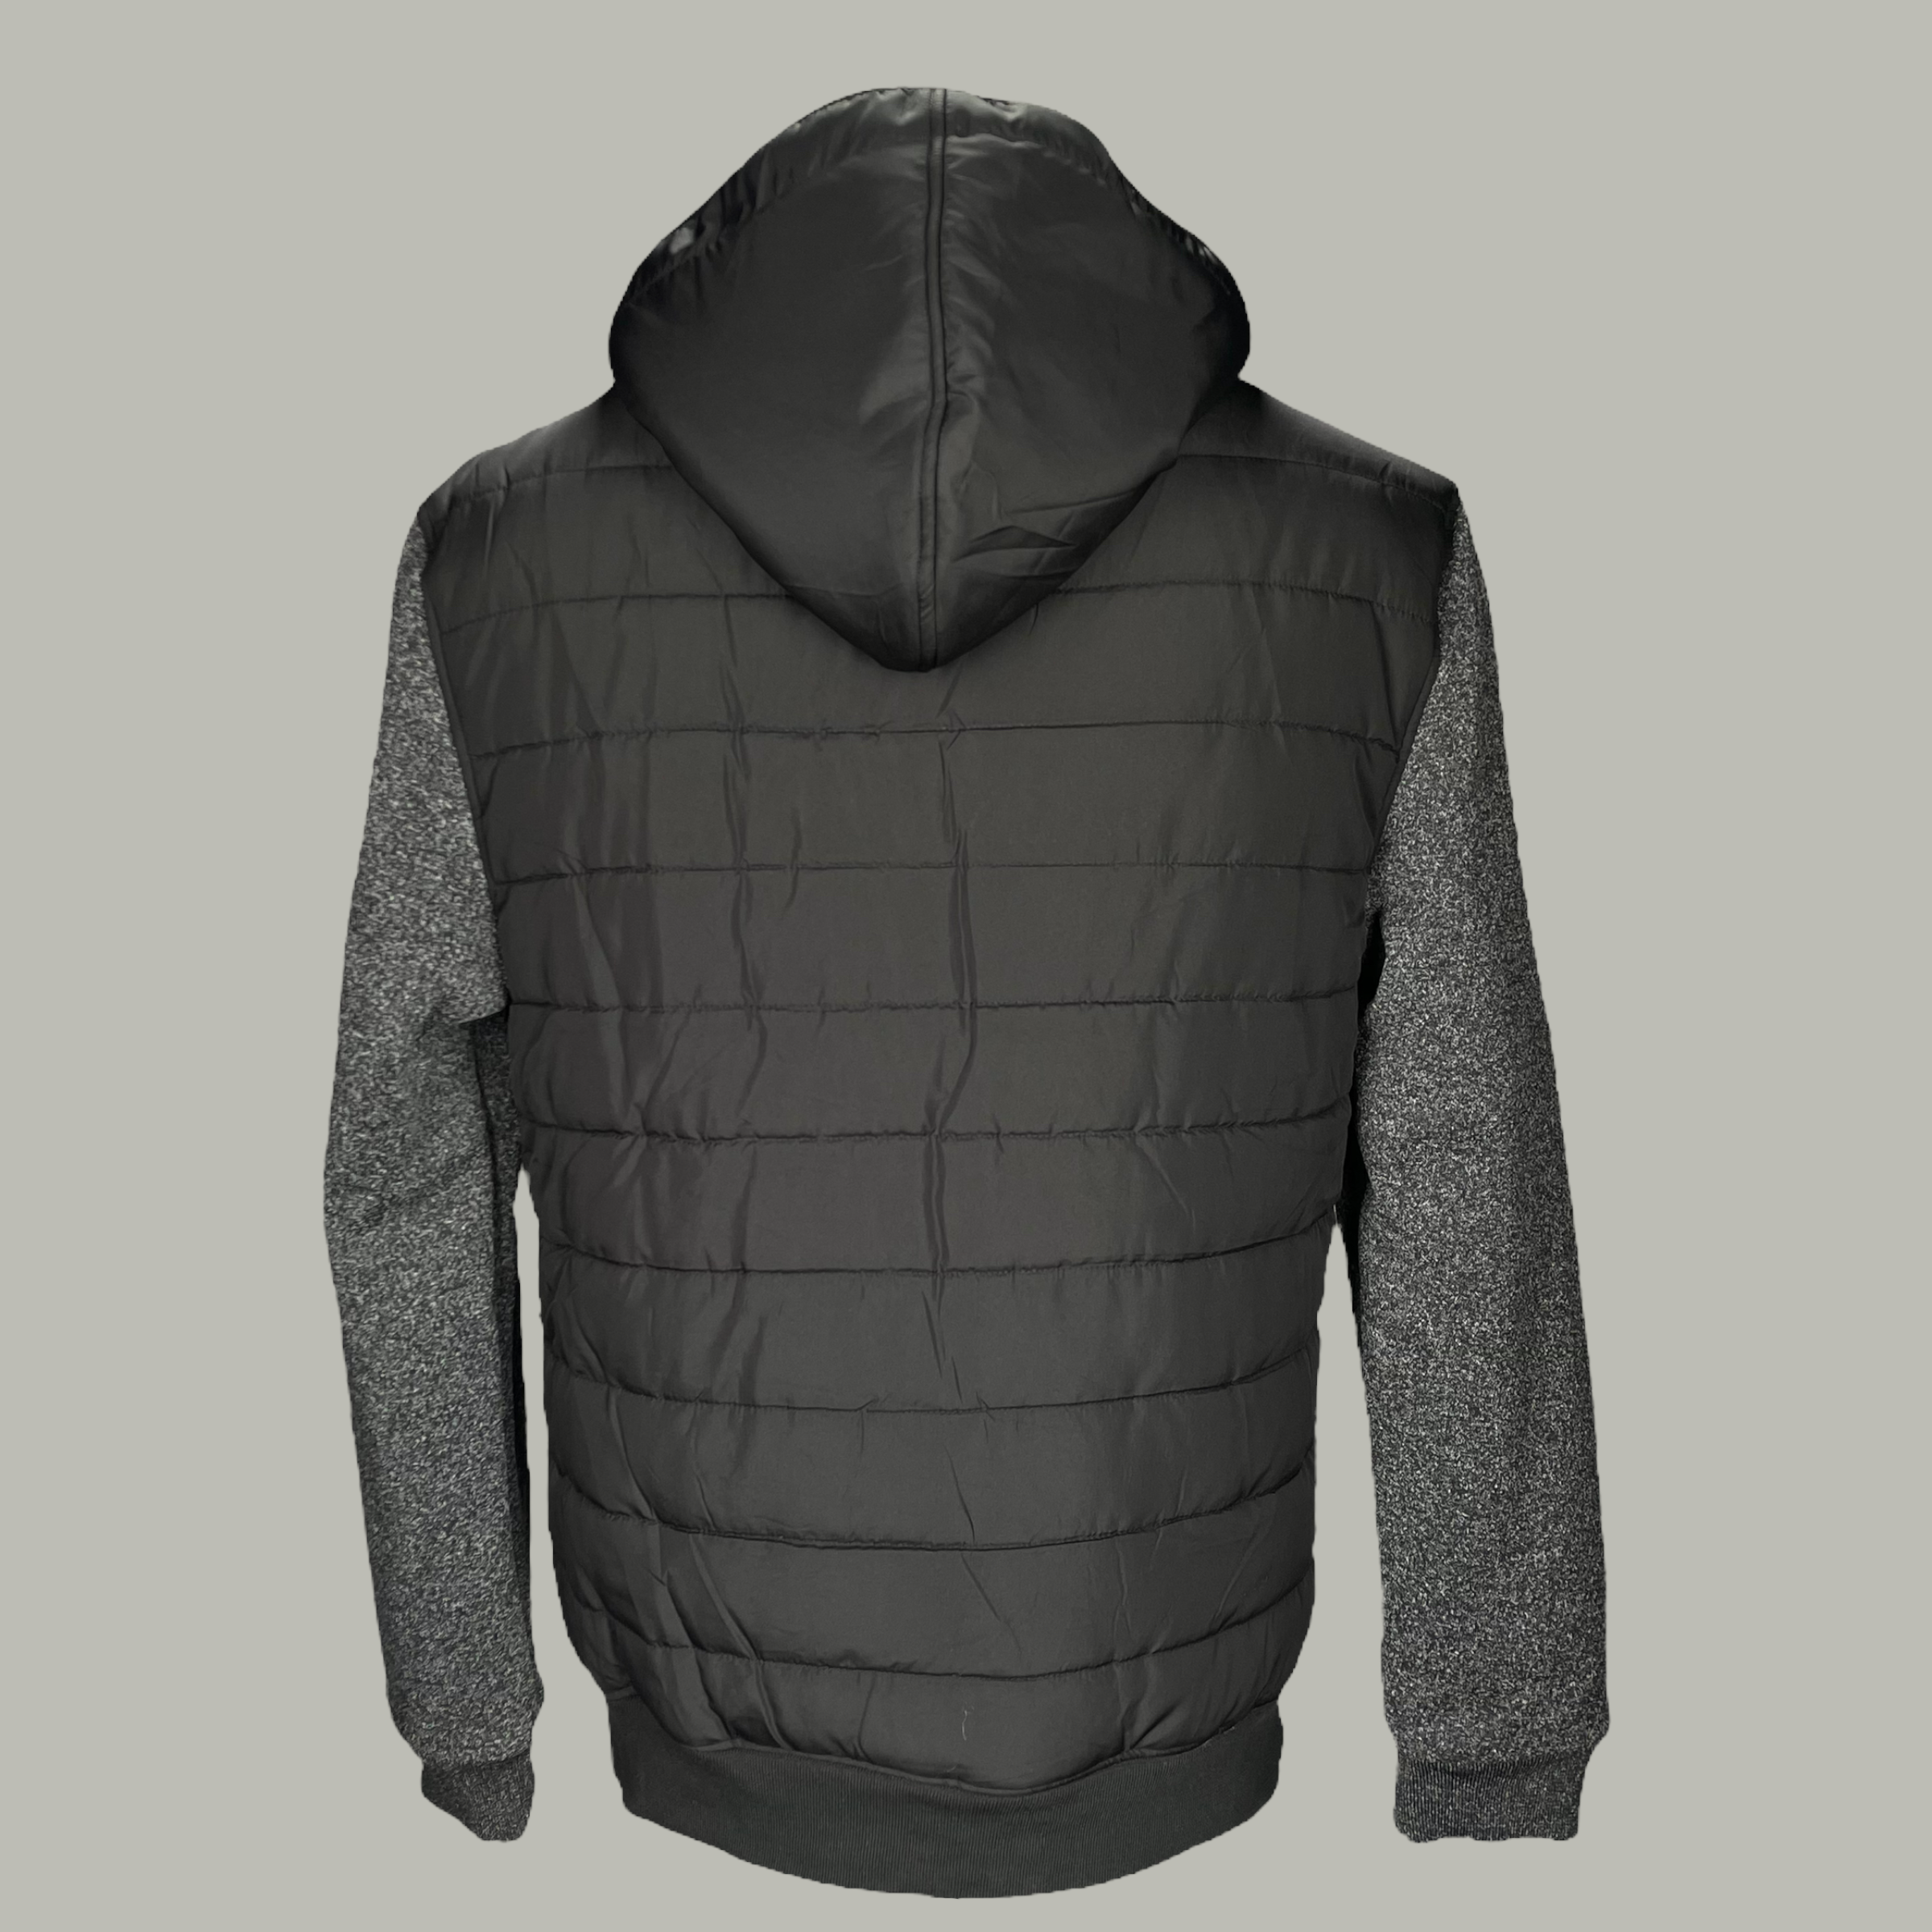 MS100-443 BLK HOODY WITH CORD